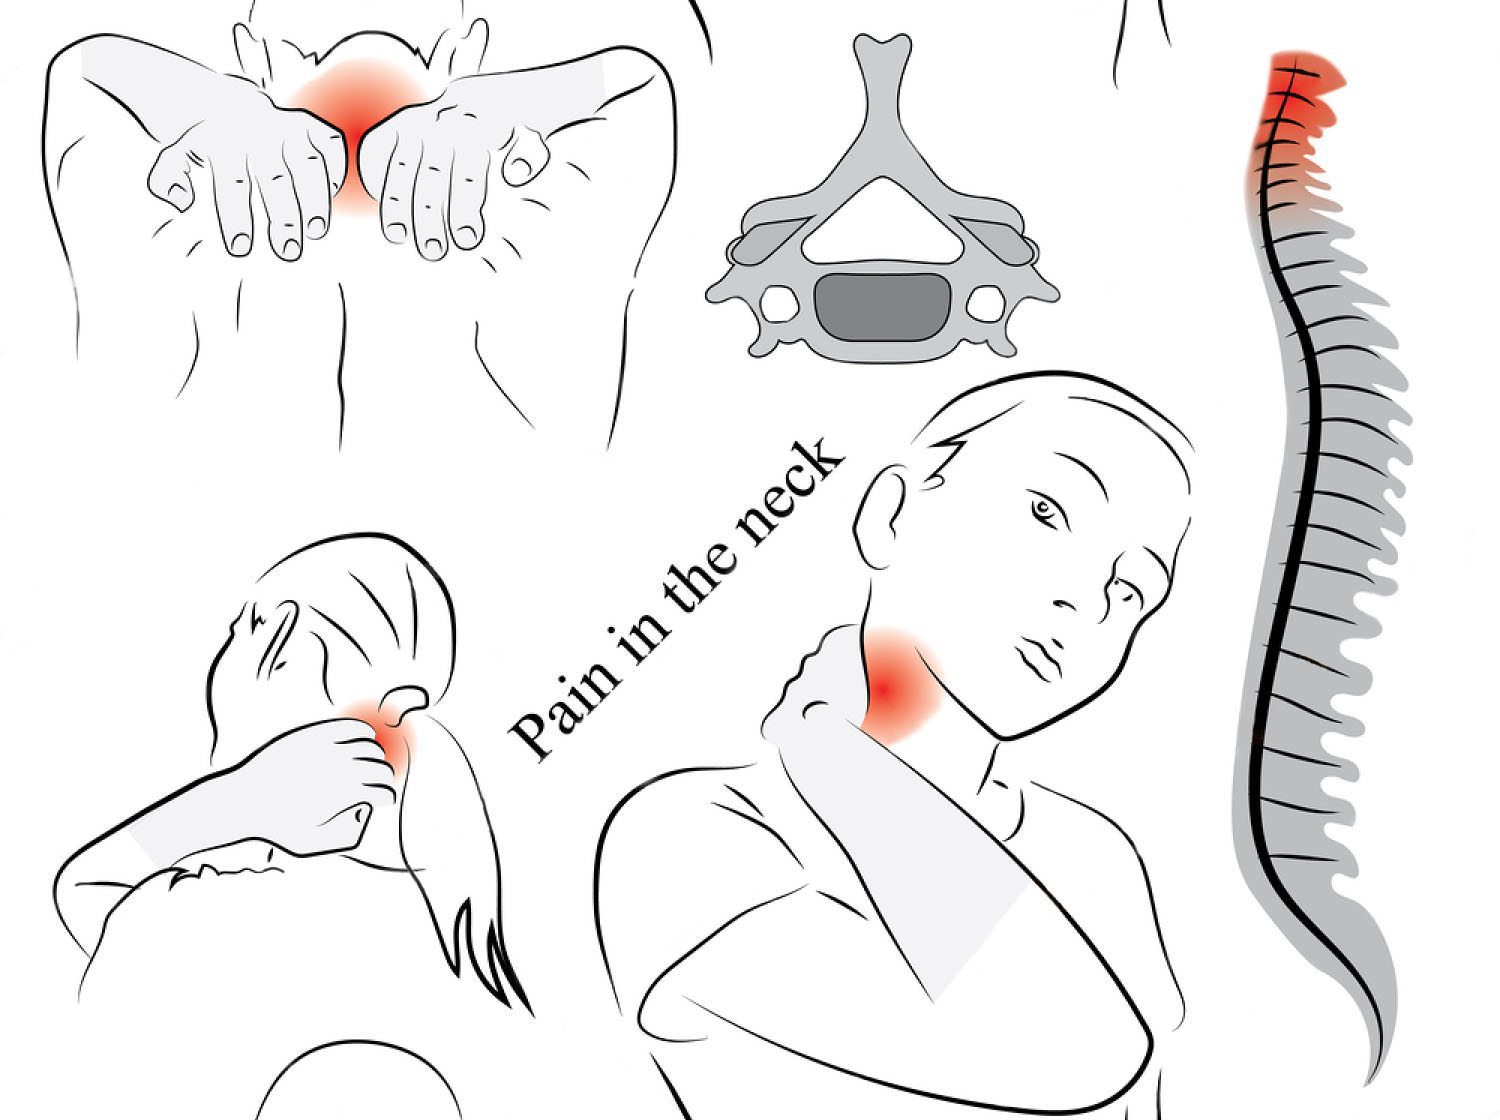 pain in the neck